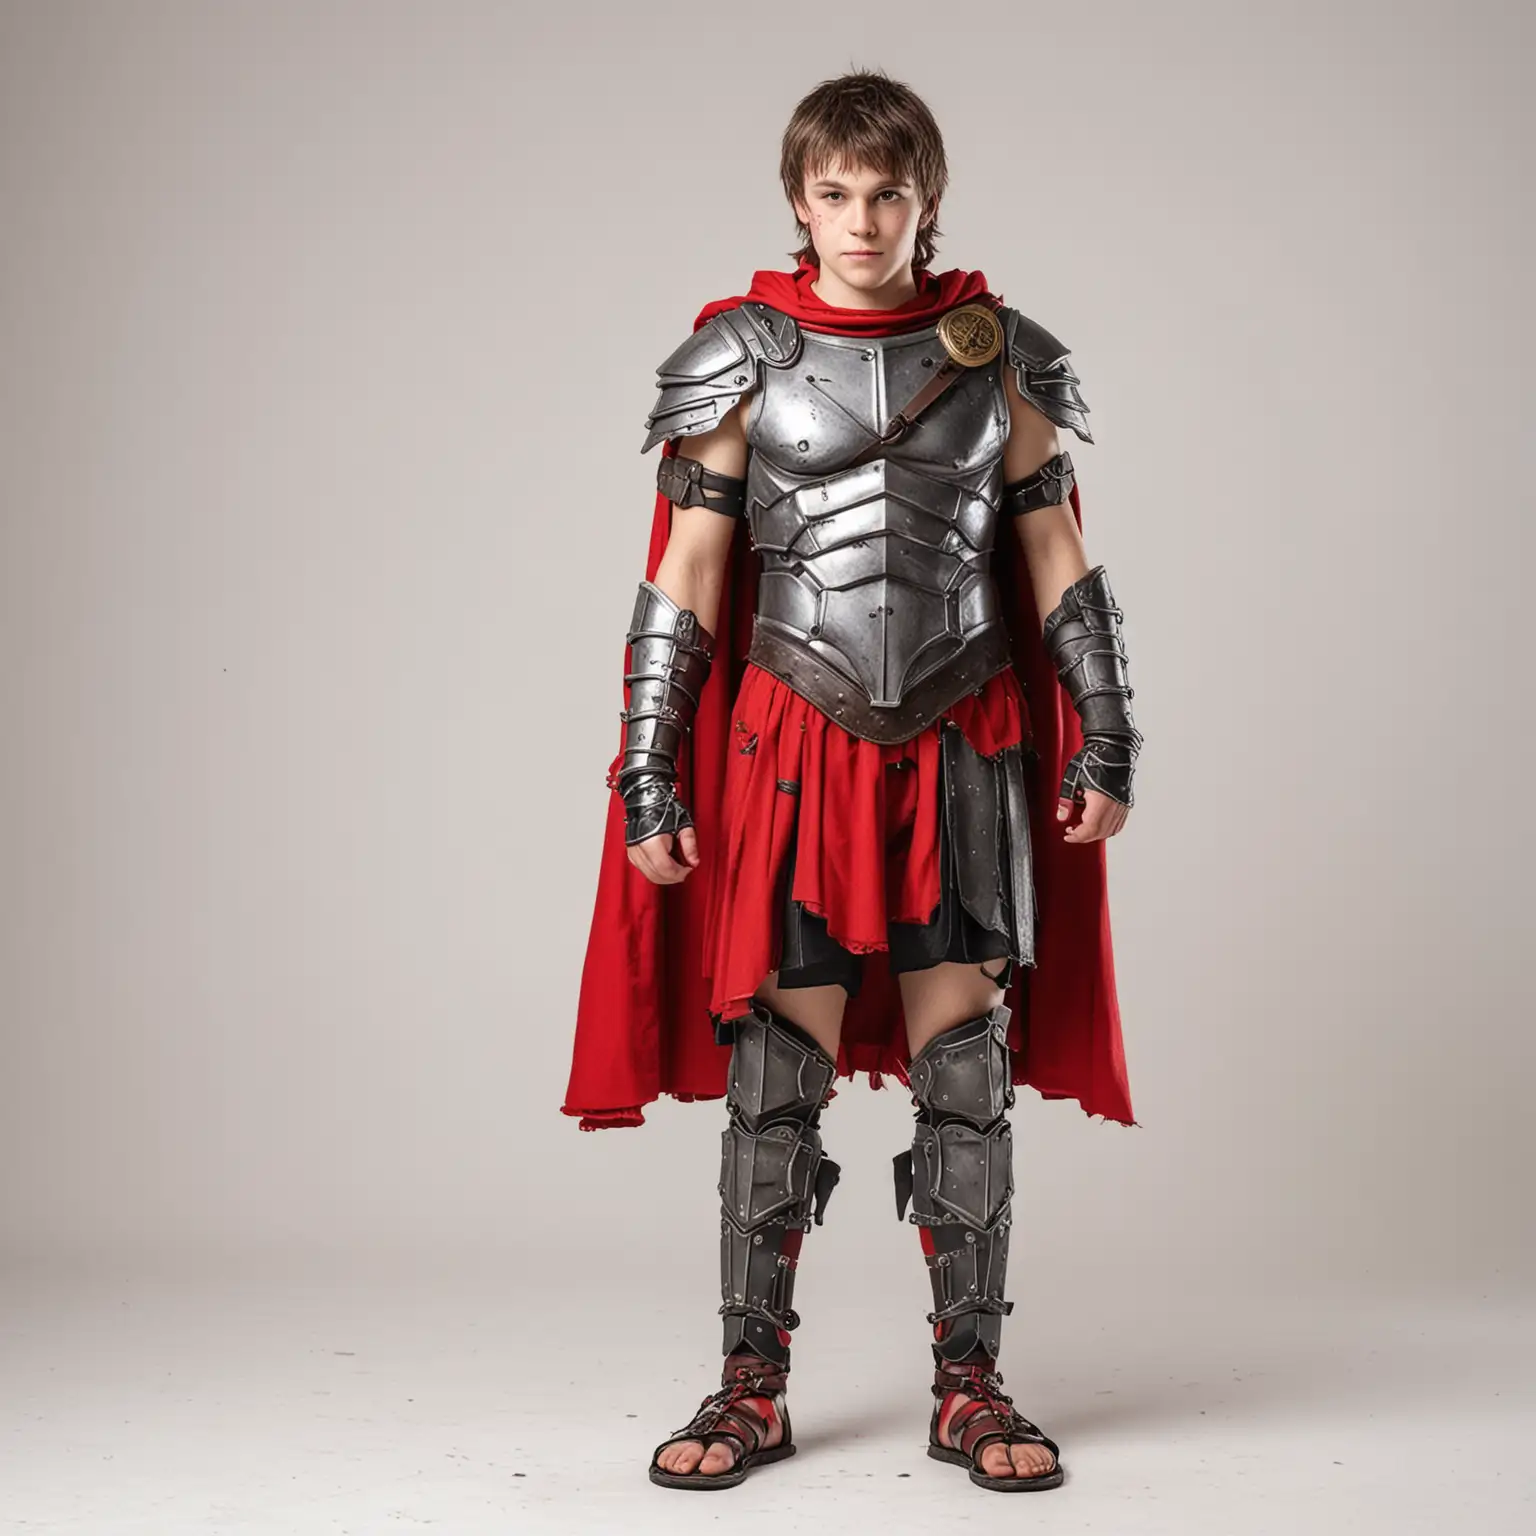 plain white background, cute 18-year old boy, wearing very plastic amateurish cosplay spartan warrior costume, red cloak, sandals on feet